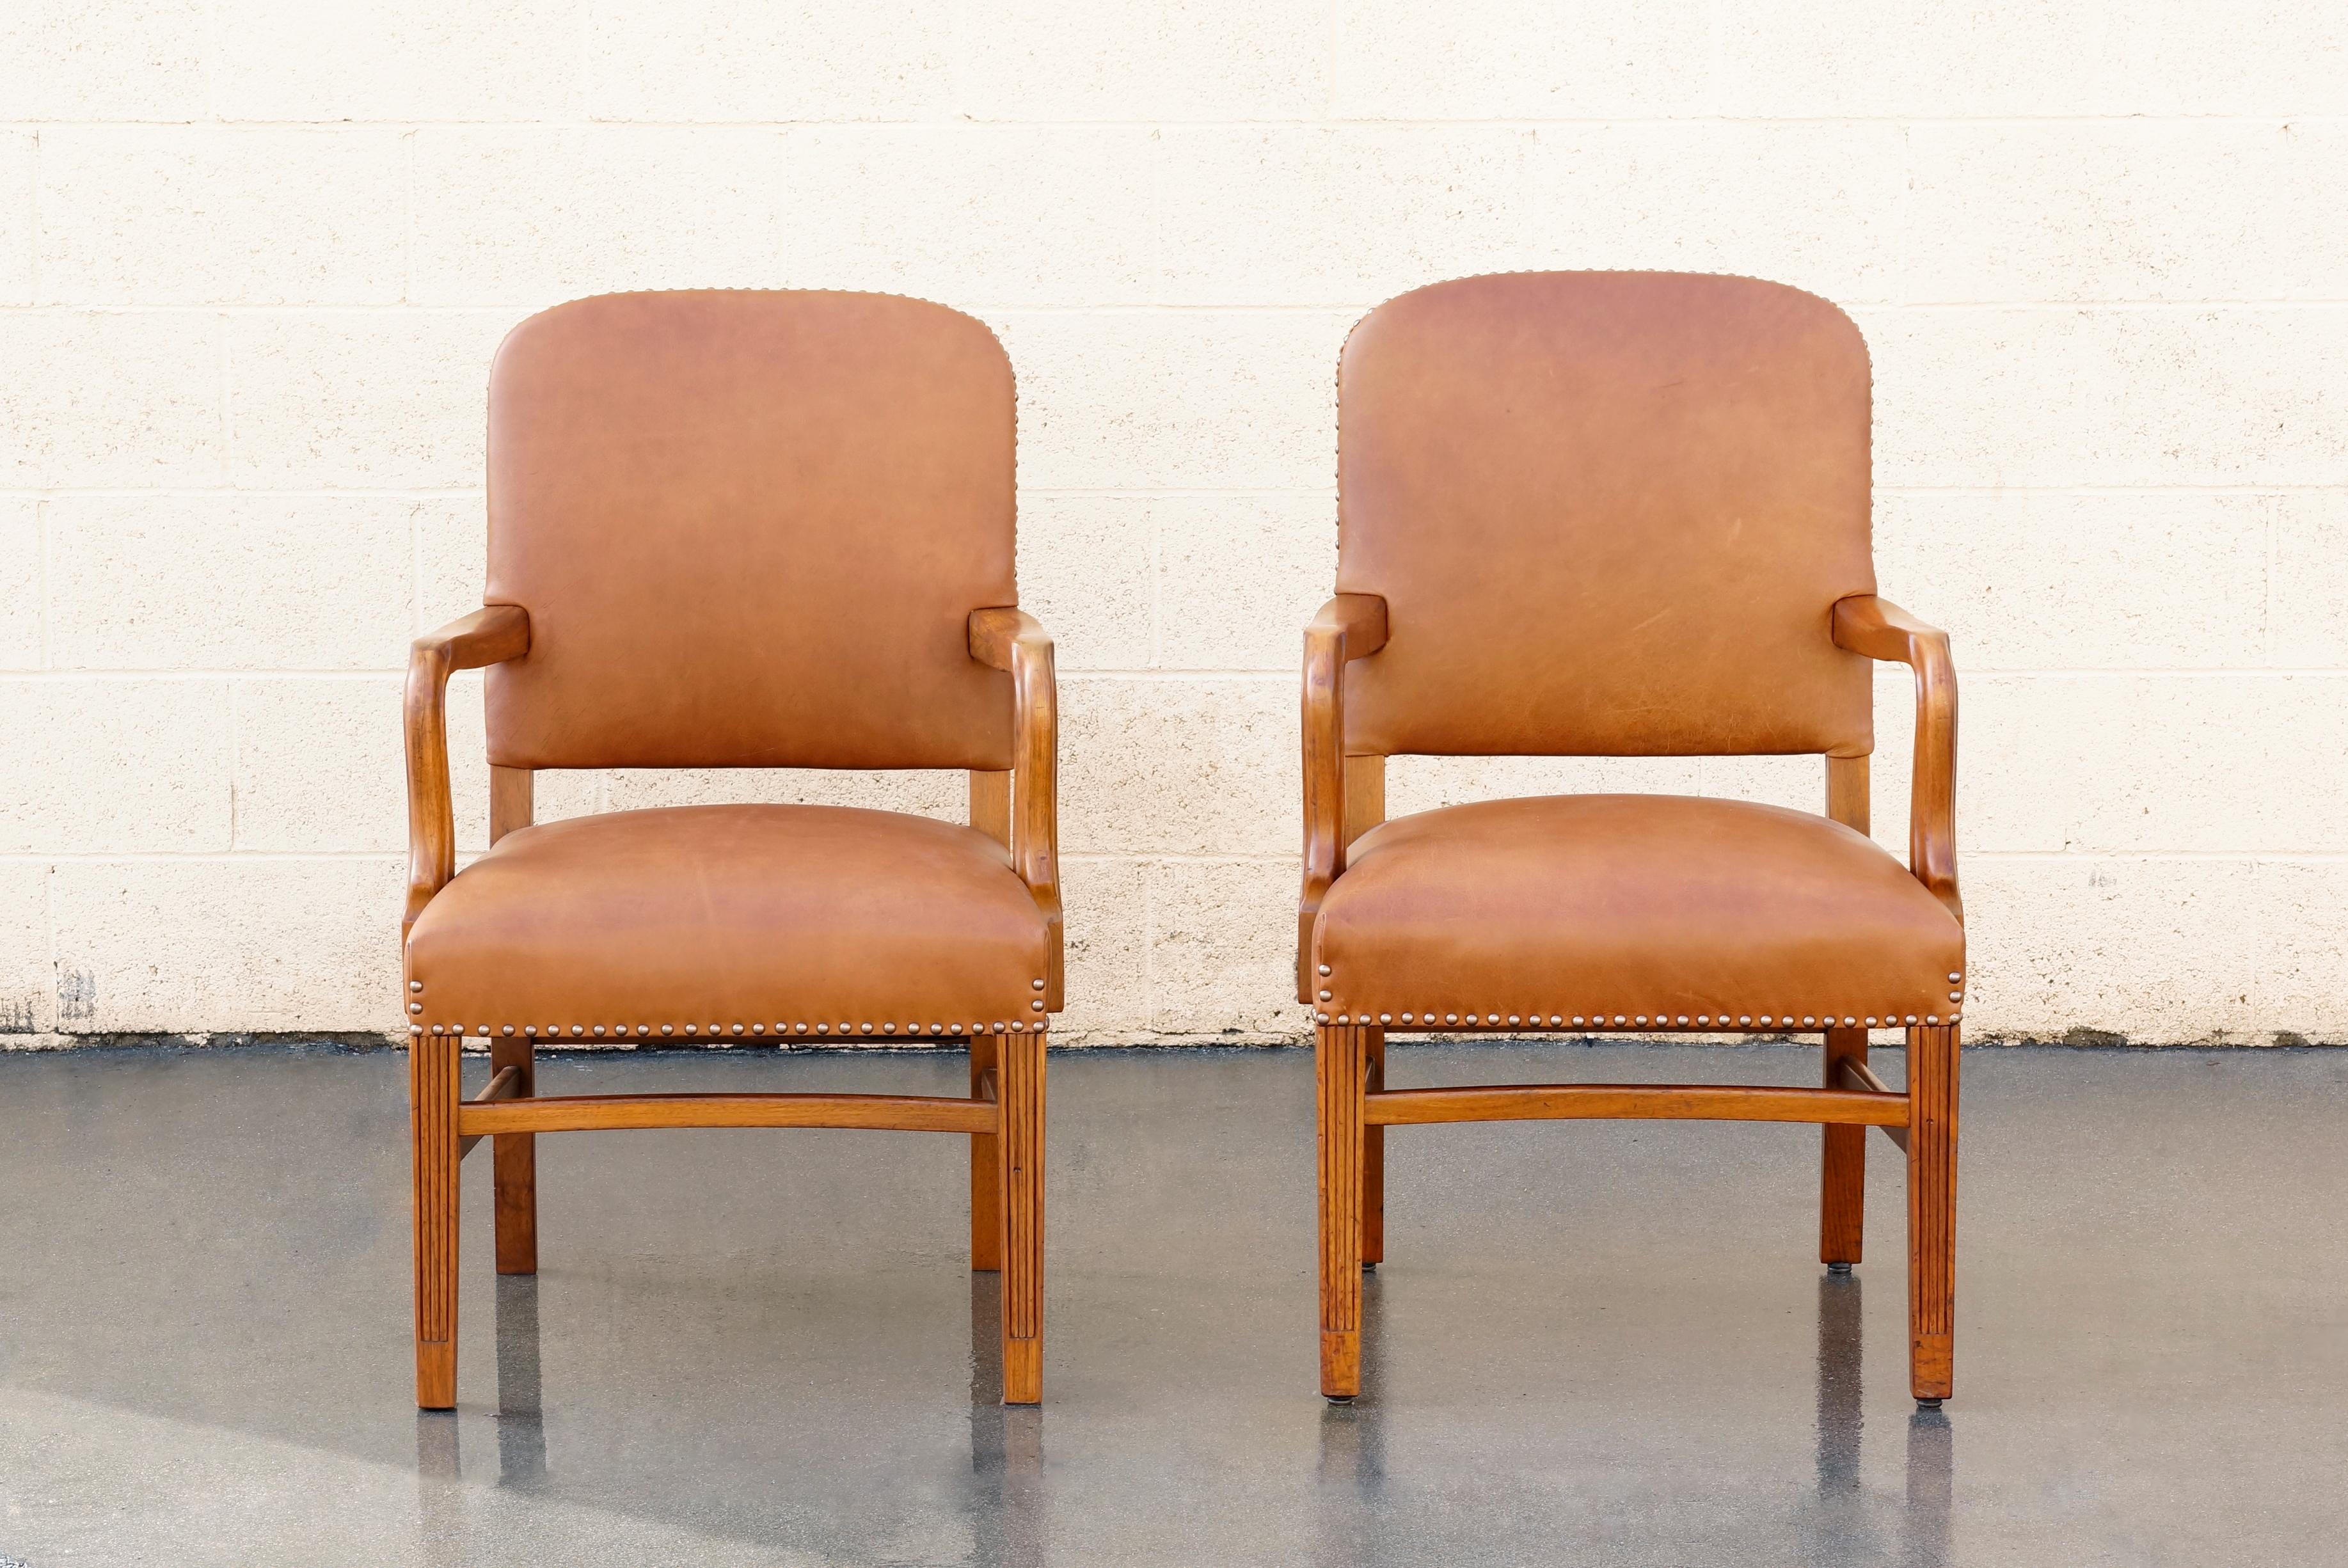 American Craftsman Pair of Gunlocke Leather and Oak Armchairs, 1948 For Sale